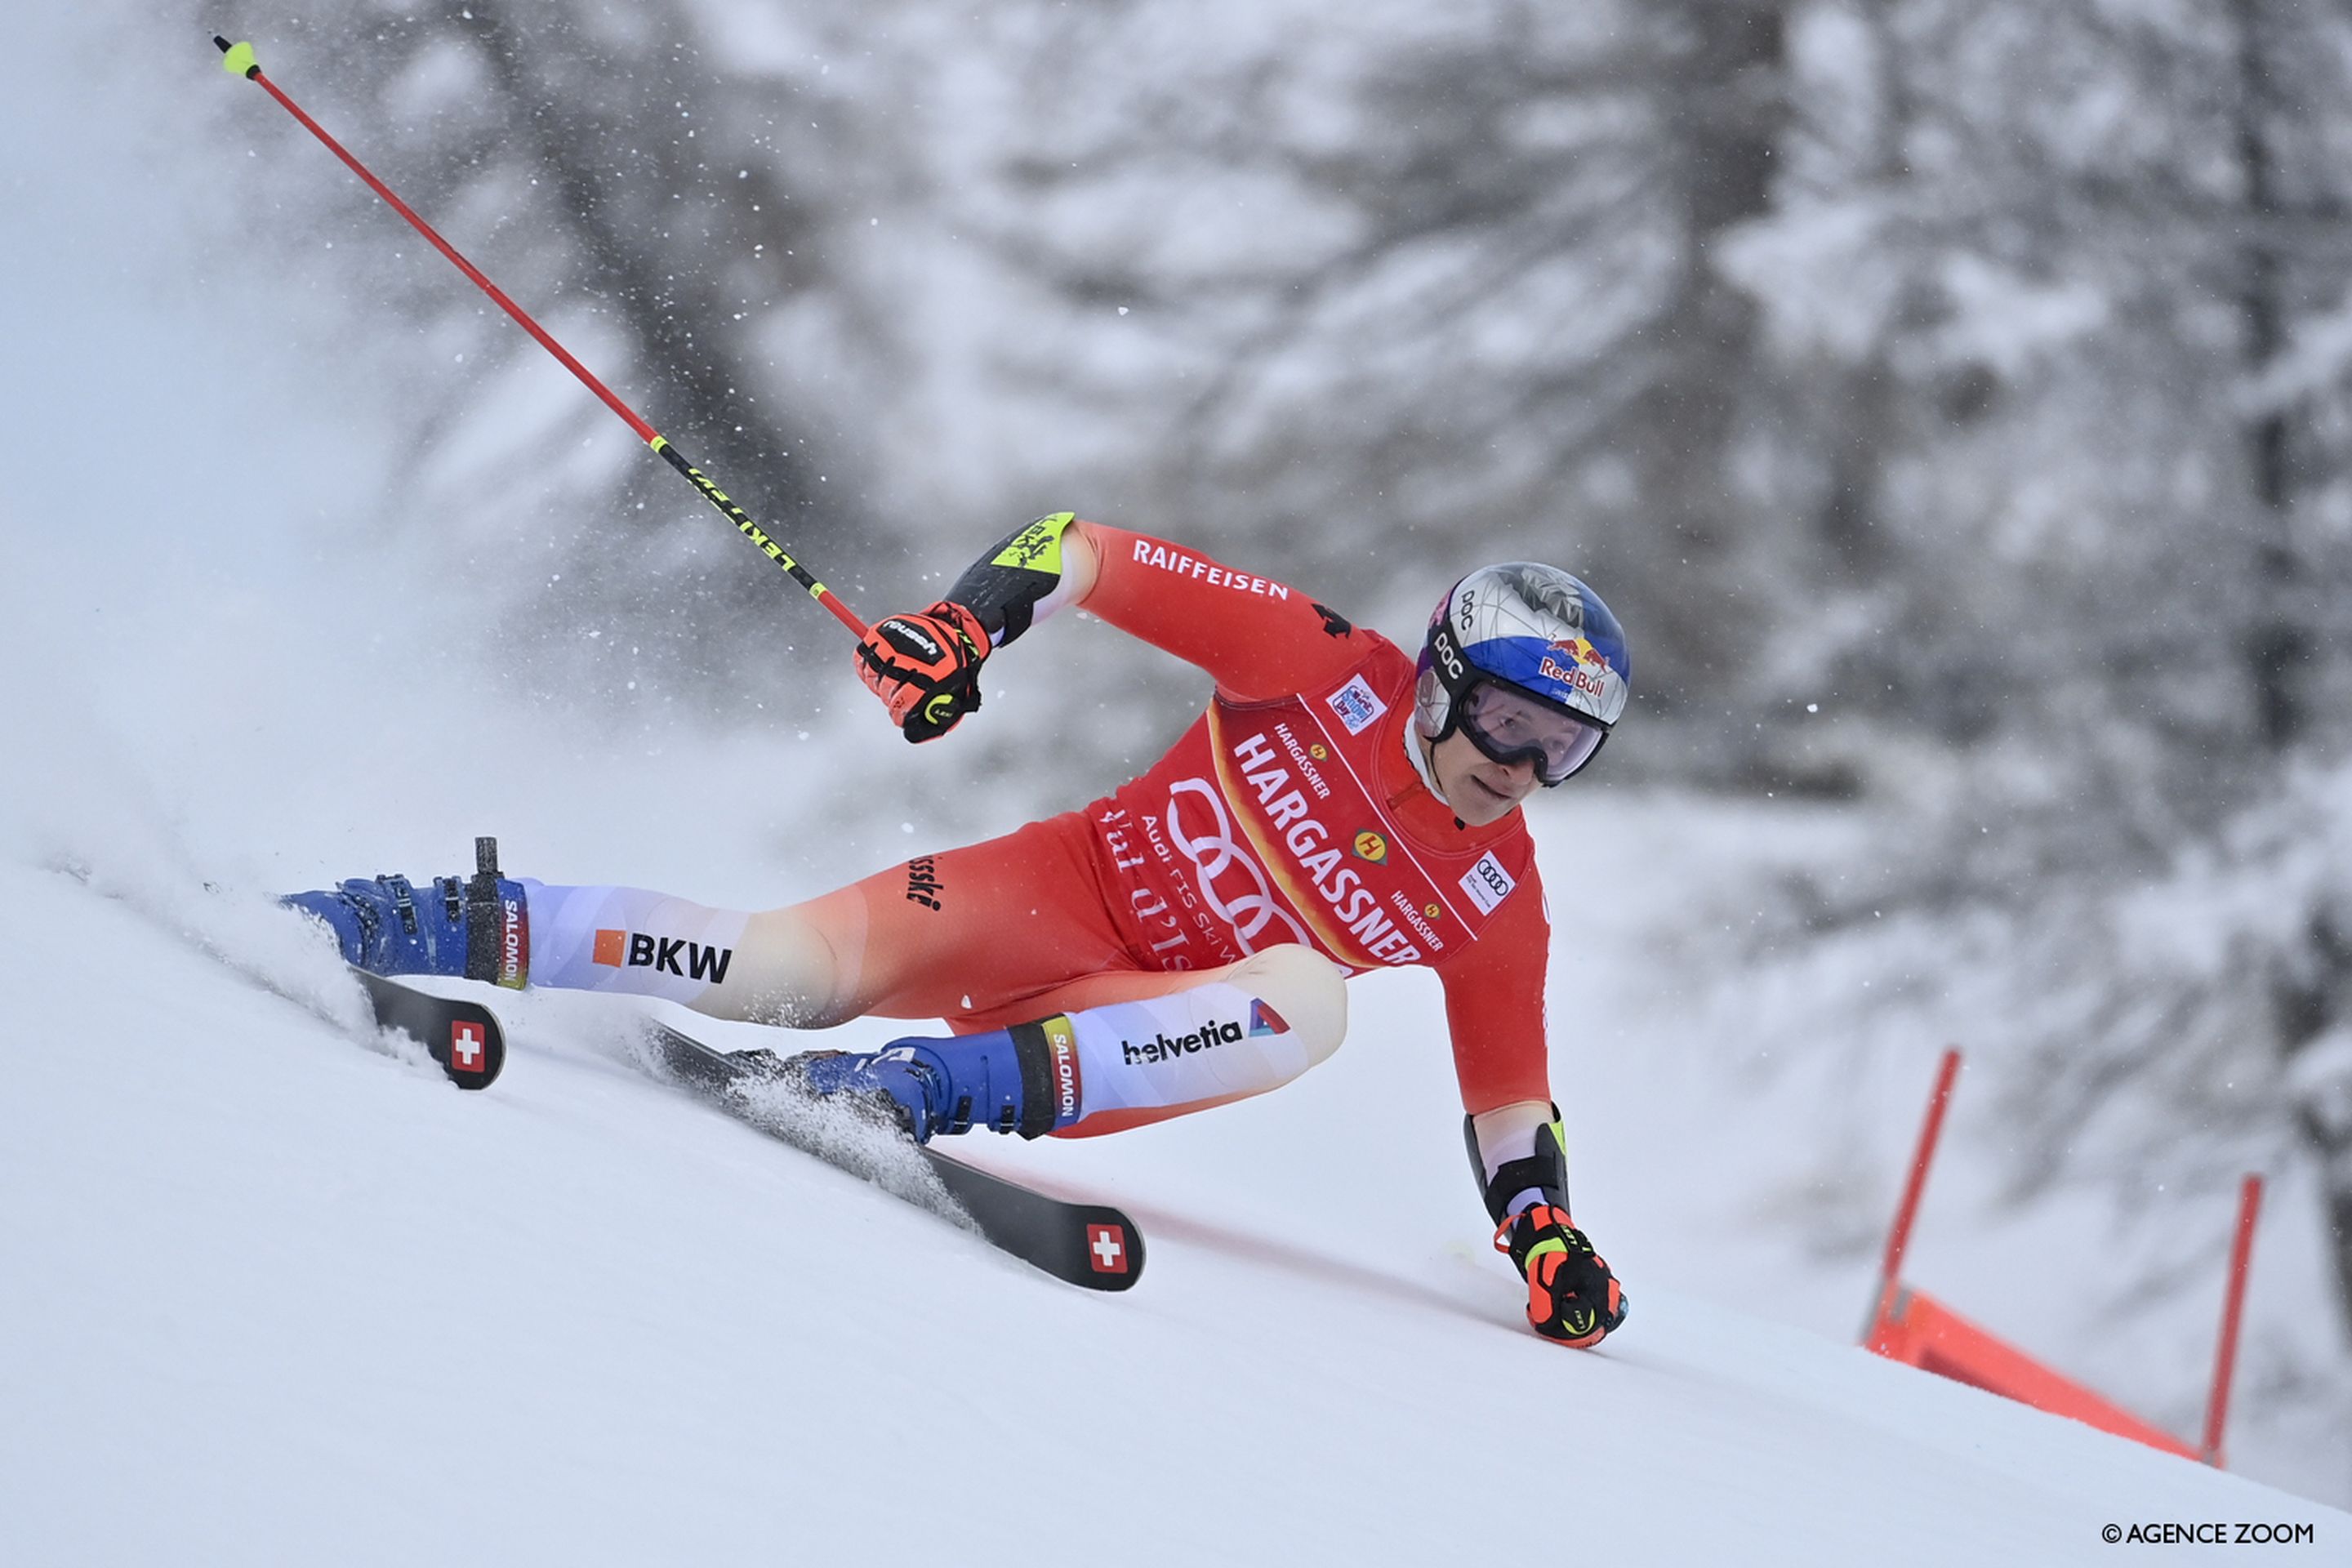 Odermatt in action during the first run of Saturday's giant slalom (Agence Zoom)